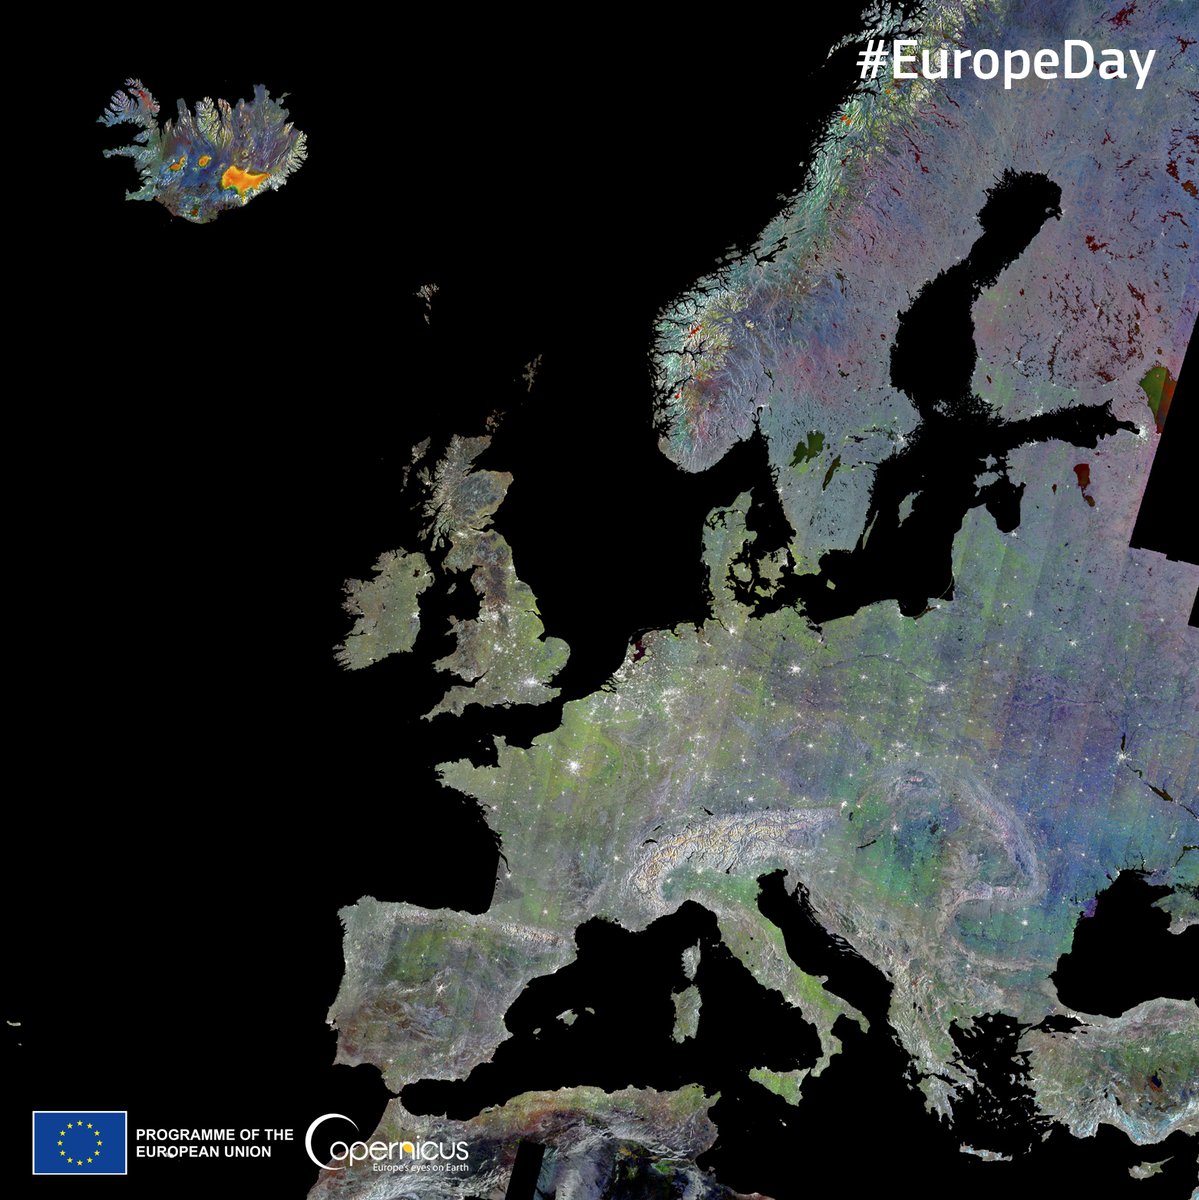 We wish our followers, friends & colleagues a happy #EuropeDay🇪🇺 ██ █╬█ ███ ███ ███ ██ ██▄ ███ █╬█ █▄ █╬█ █▄╬ █╬█ █▄█ █▄ █╬█ █▄█ █▄█ █▄ ███ █╬█ █▄█ █╬╬ █▄ ███ █╬█ ╬█╬ ⬇️#Copernicus #Sentinel1🇪🇺🛰️image